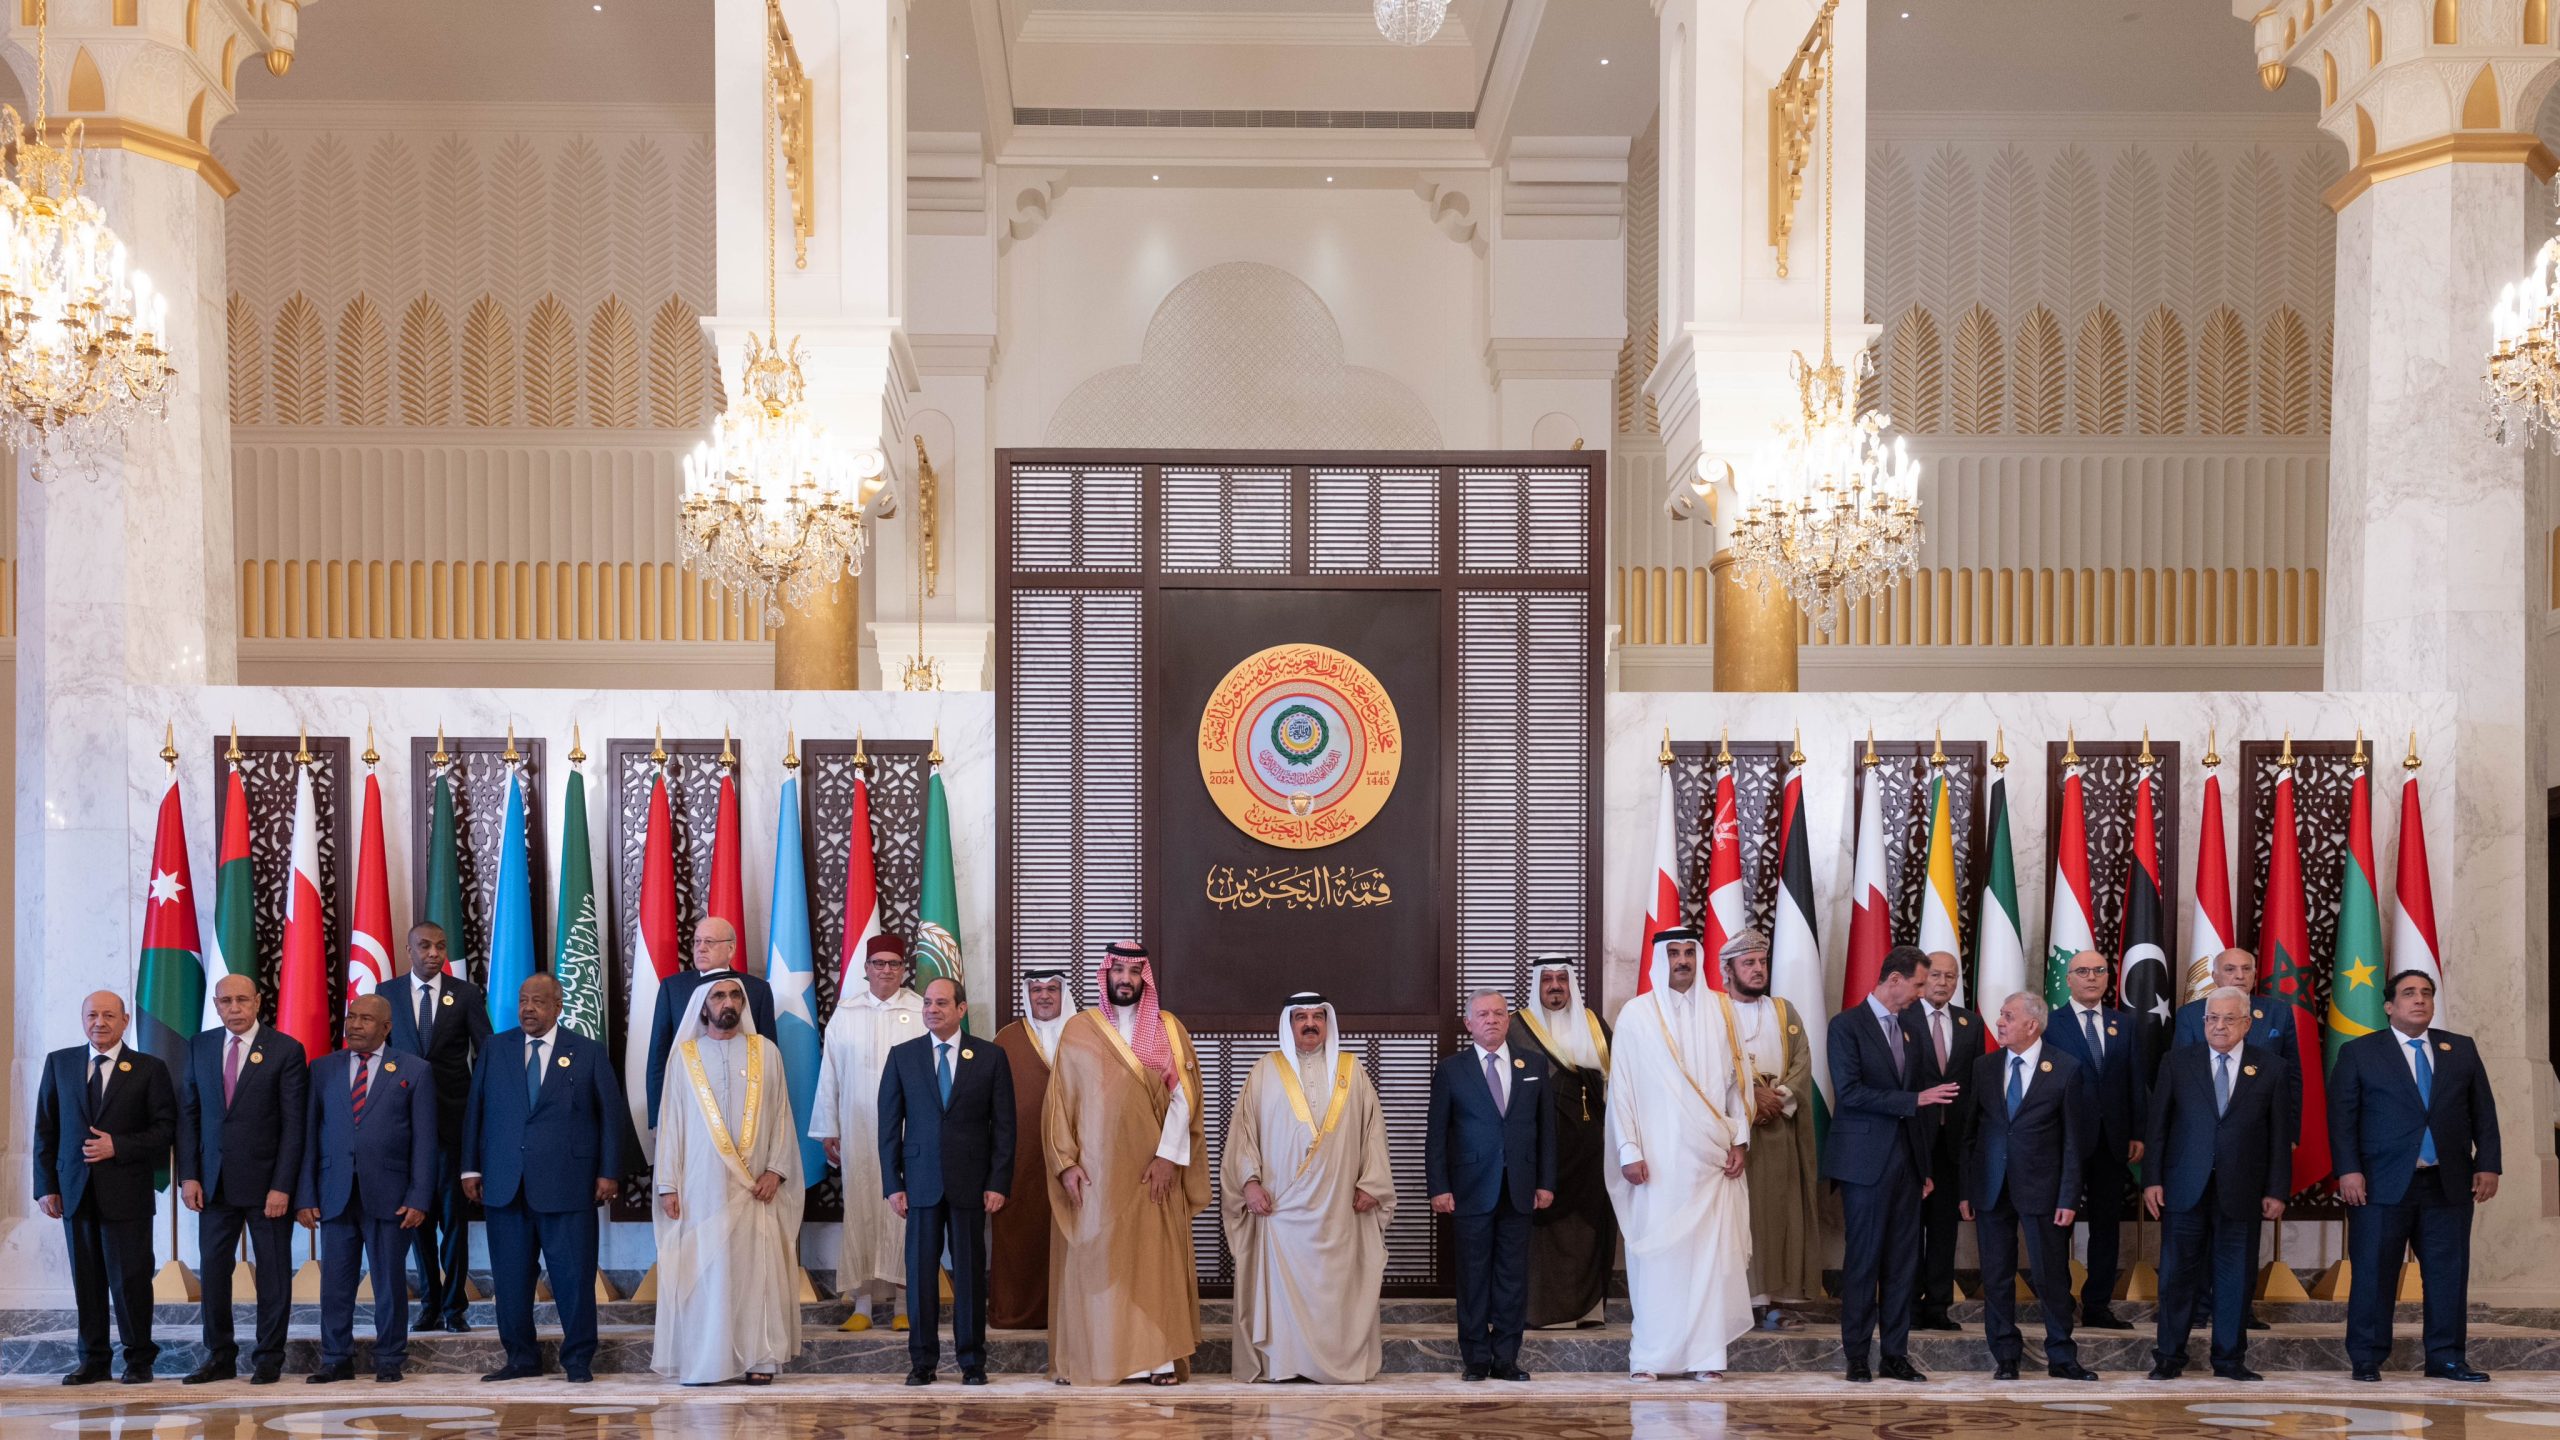 Qatar’s Amir attends opening session of Arab League Summit in Bahrain